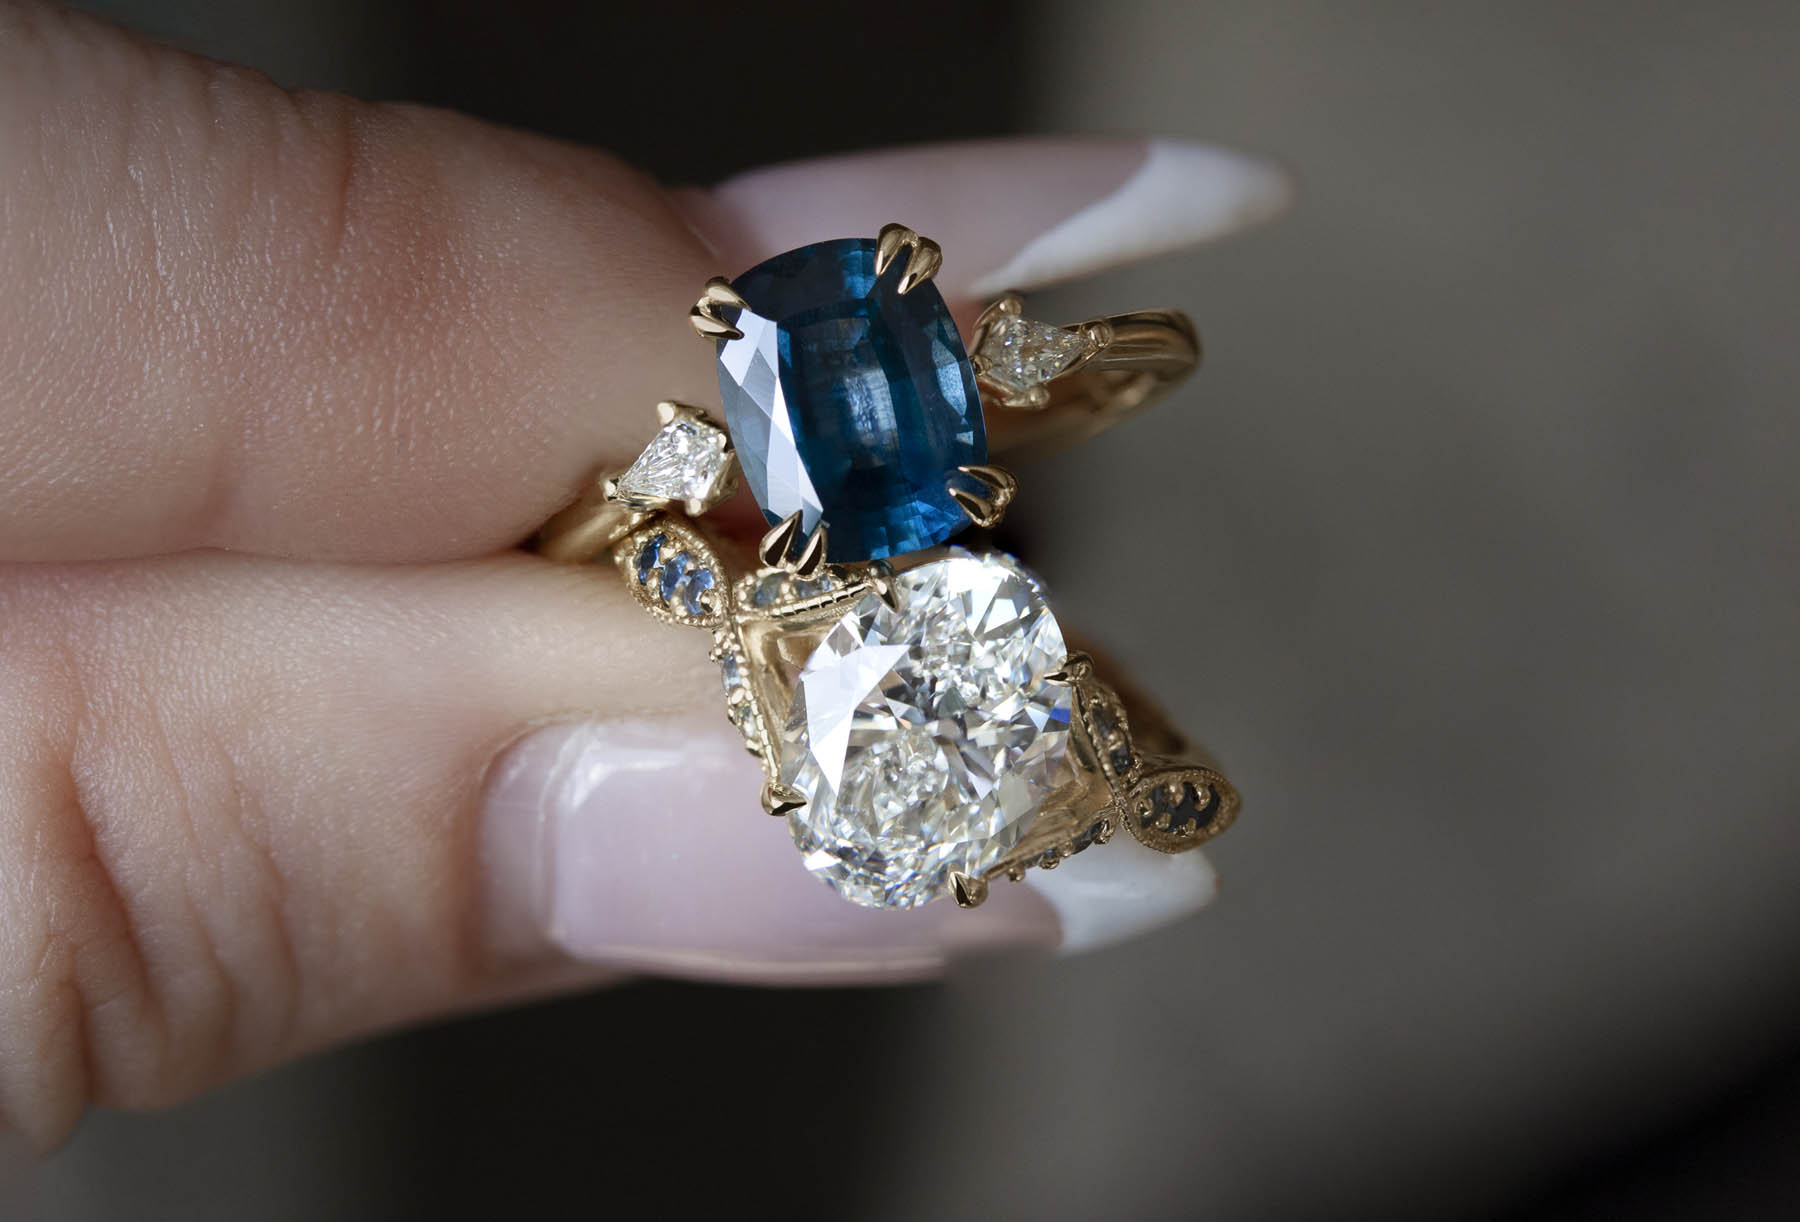 A close-up of two rings: one with a blue rectangular cut gem, and one with an oval, crystalline gem. 